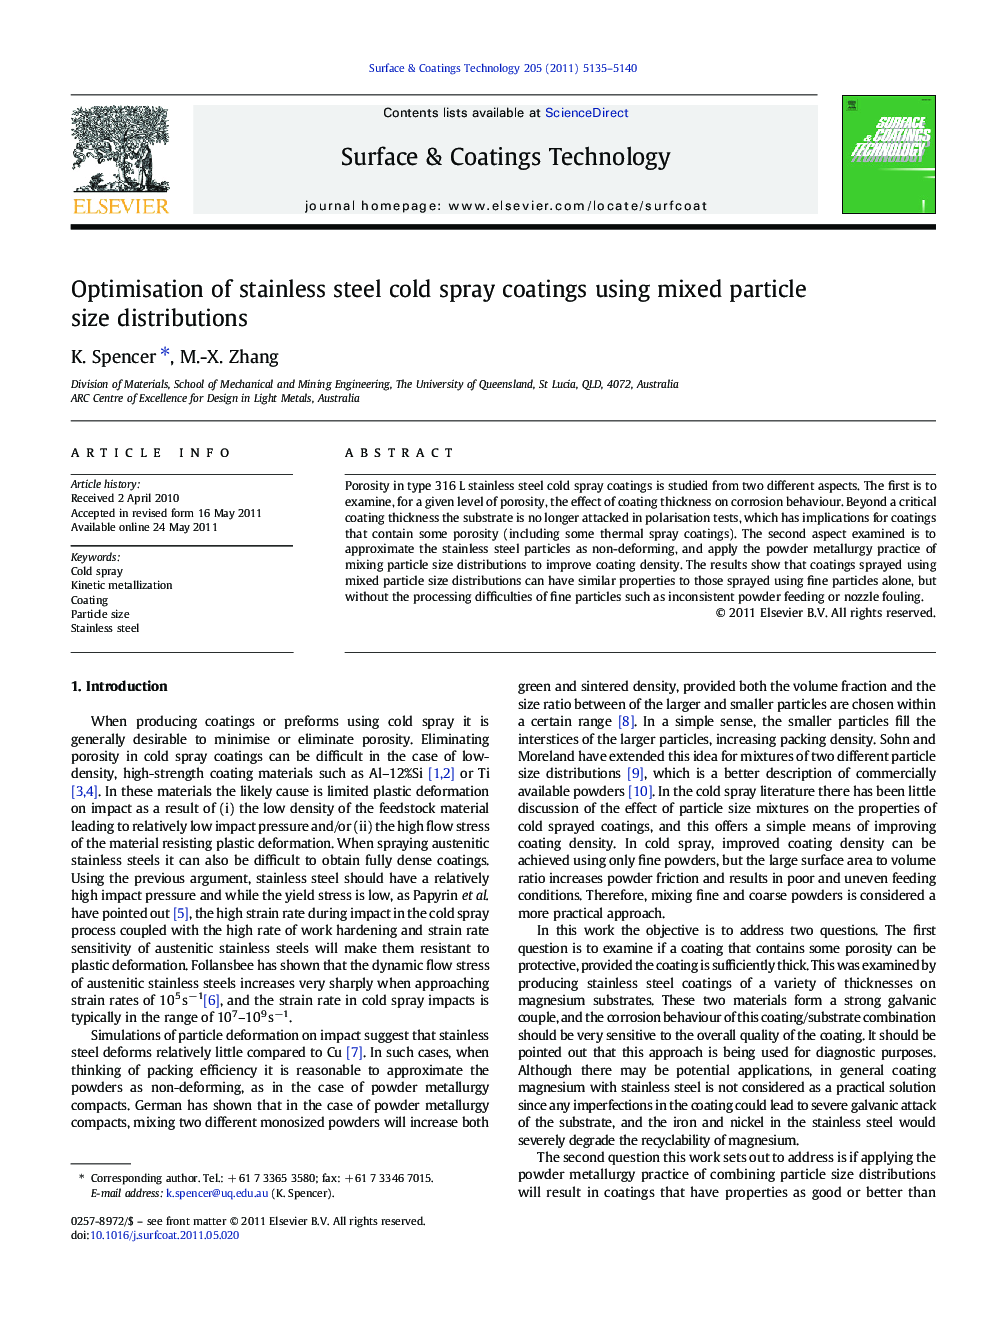 Optimisation of stainless steel cold spray coatings using mixed particle size distributions